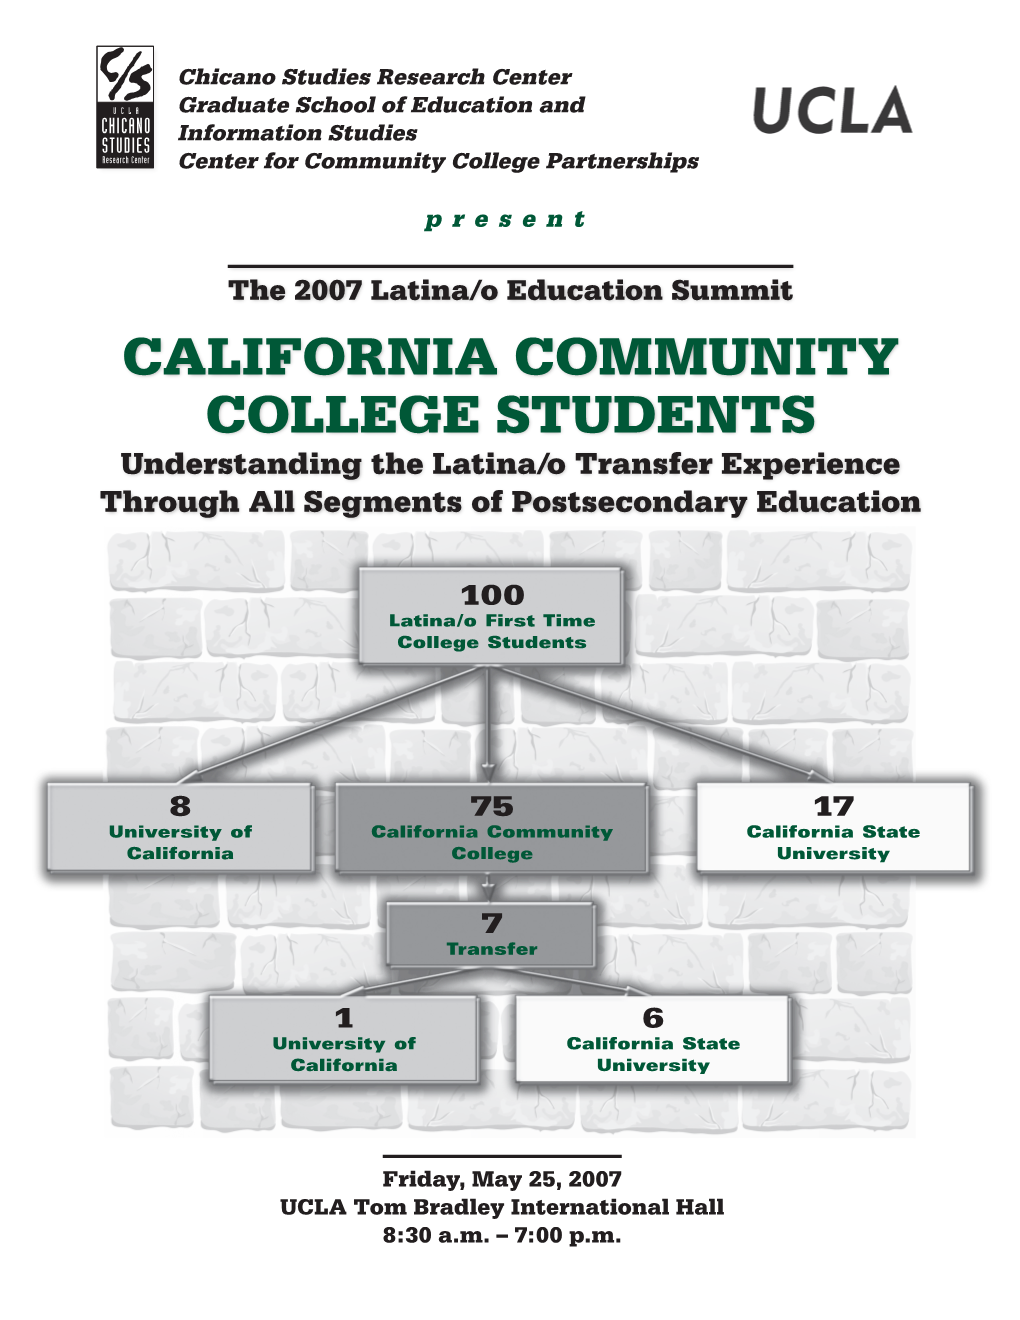 California Community College Students Understanding the Latina/O Transfer Experience Through All Segments of Postsecondary Education